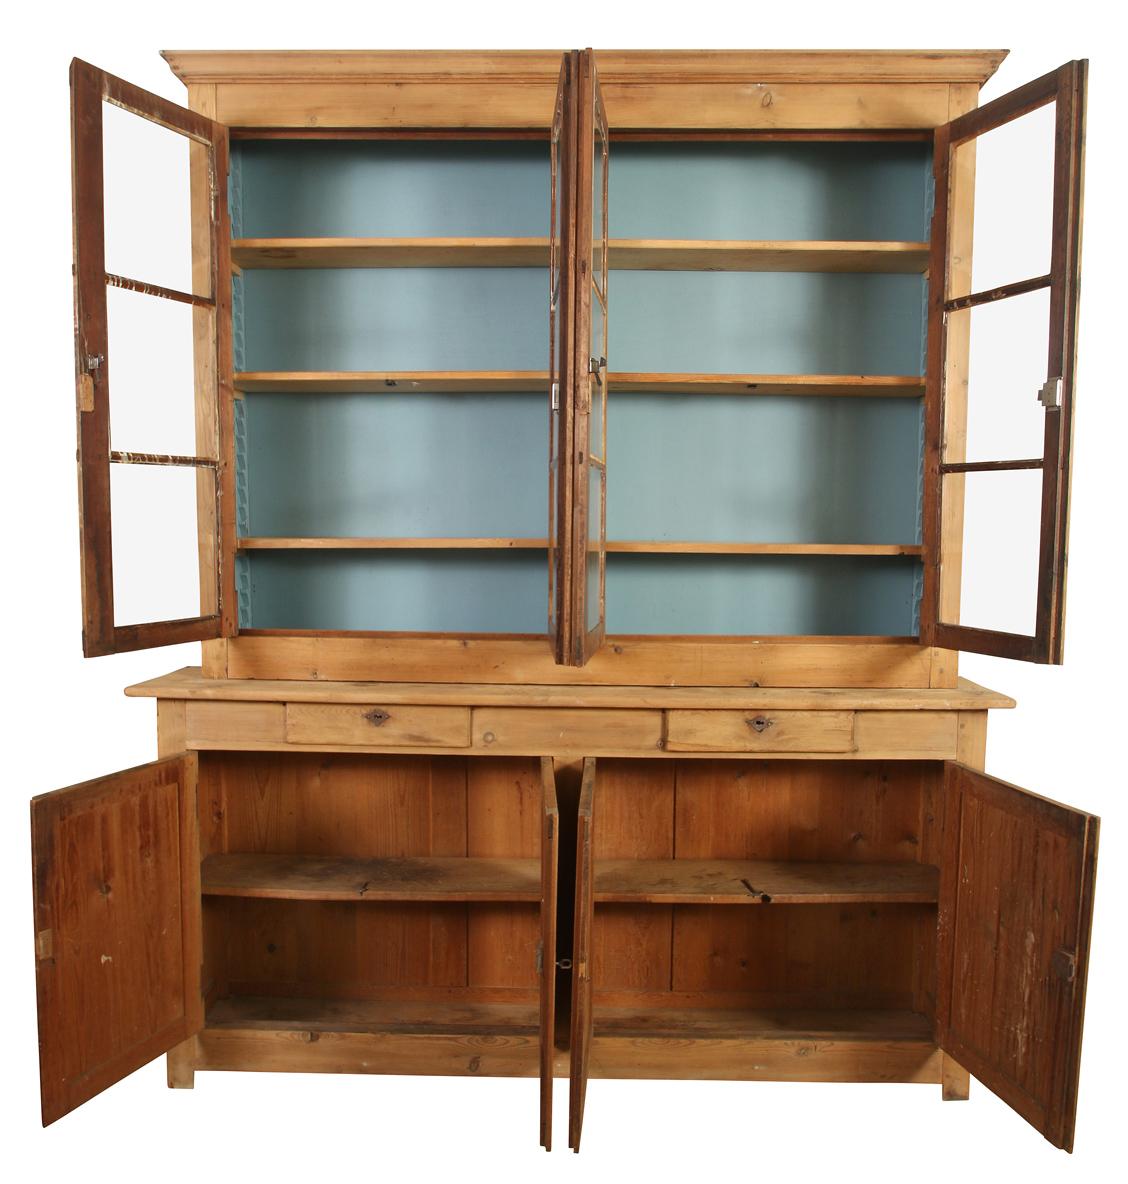 A large French pine breakfront cabinet with glass doors on upper cabinet over storage cabinets on base.  The top interior is painted blue, and is a lovely showcase for books, plates or decorative objects.  This unique piece can work in a kitchen,